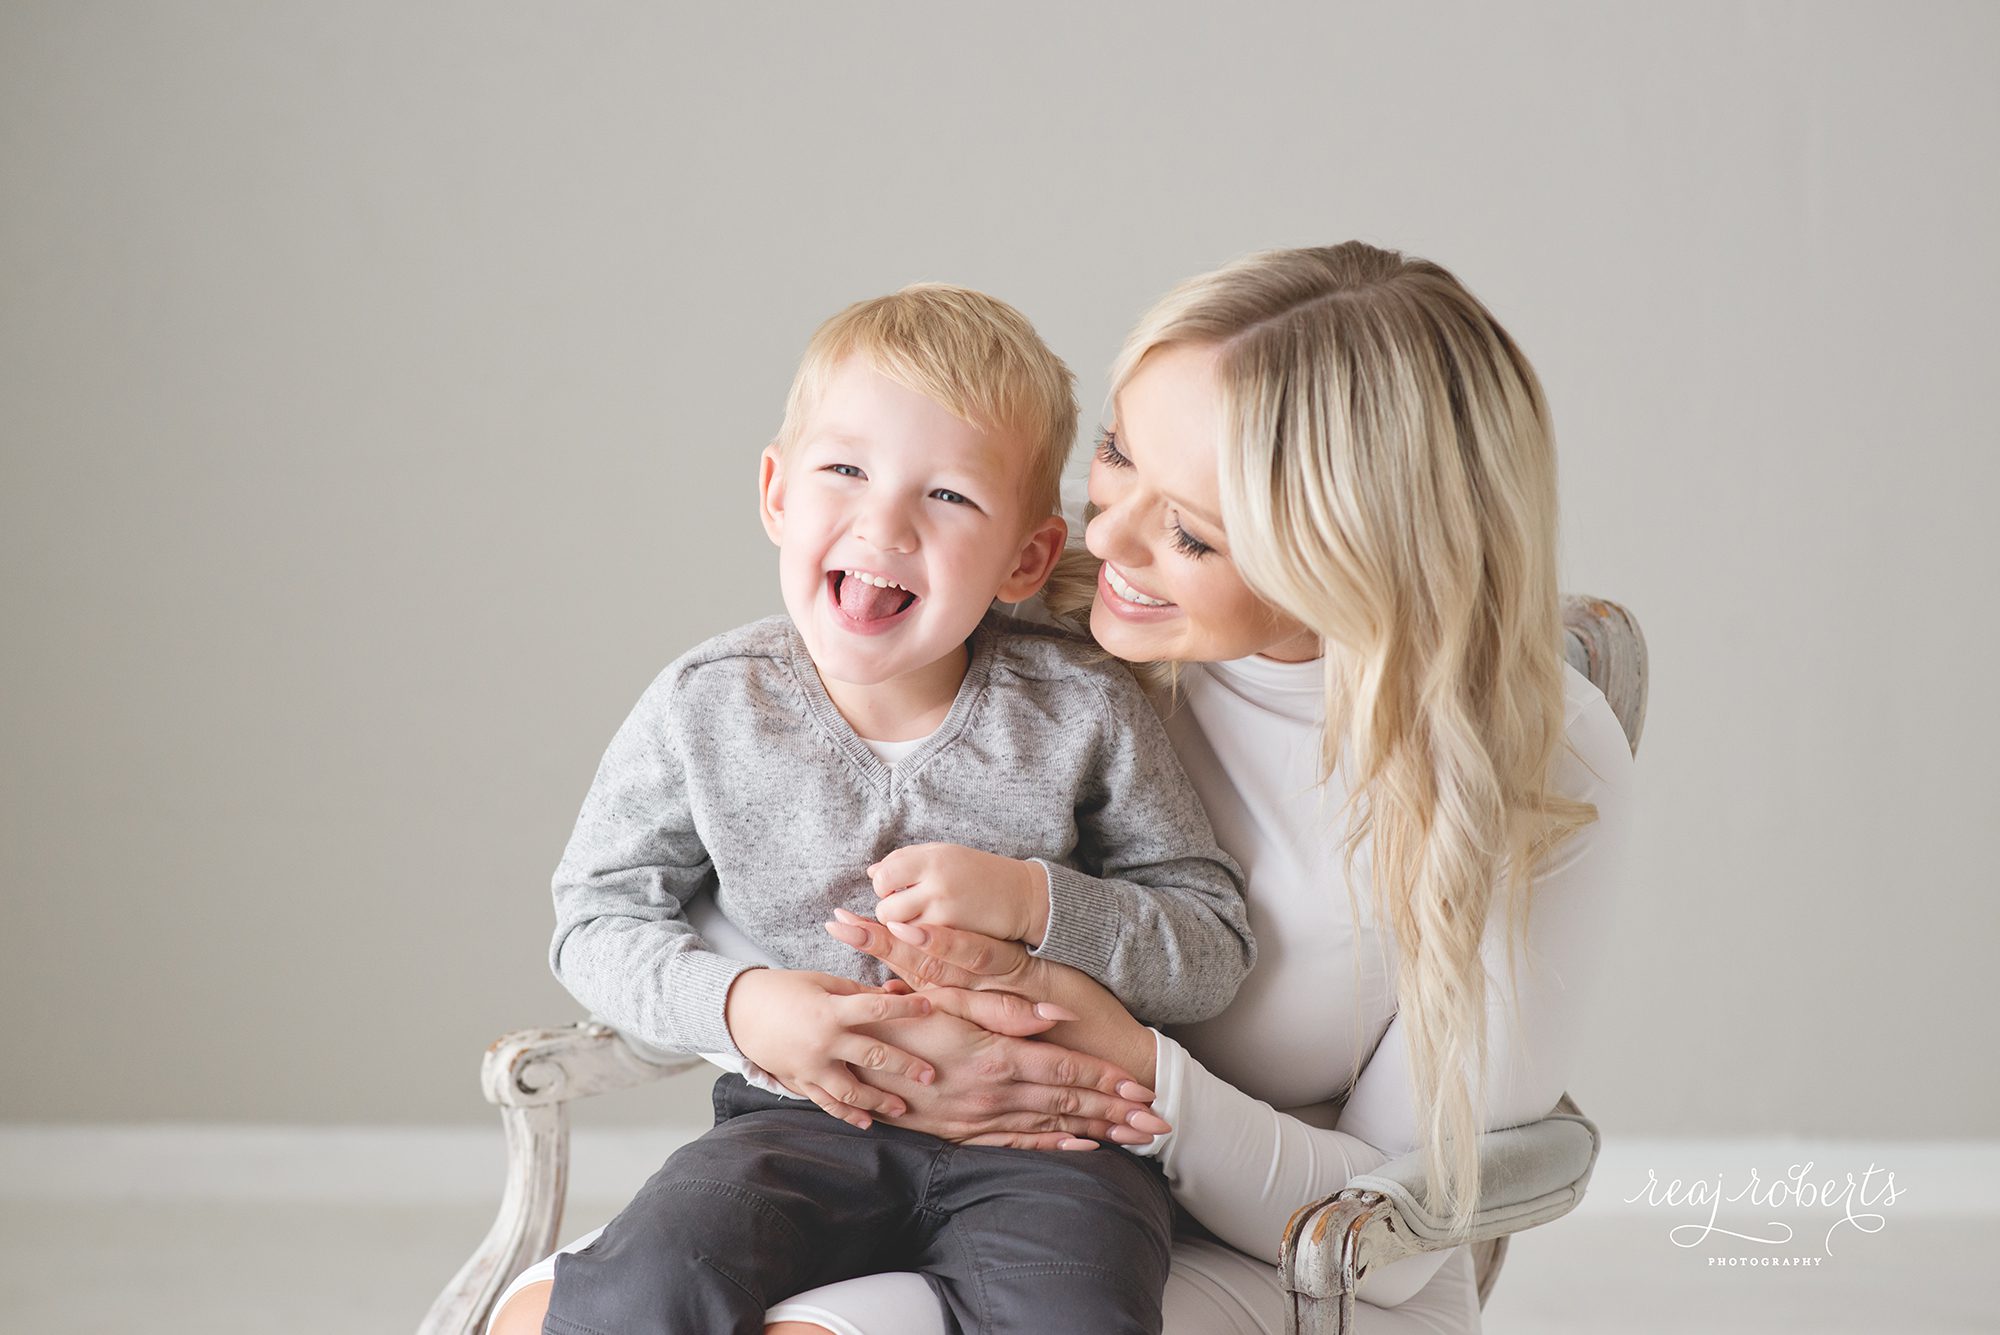 Mommy and Me Portraits | Reaj Roberts Photography